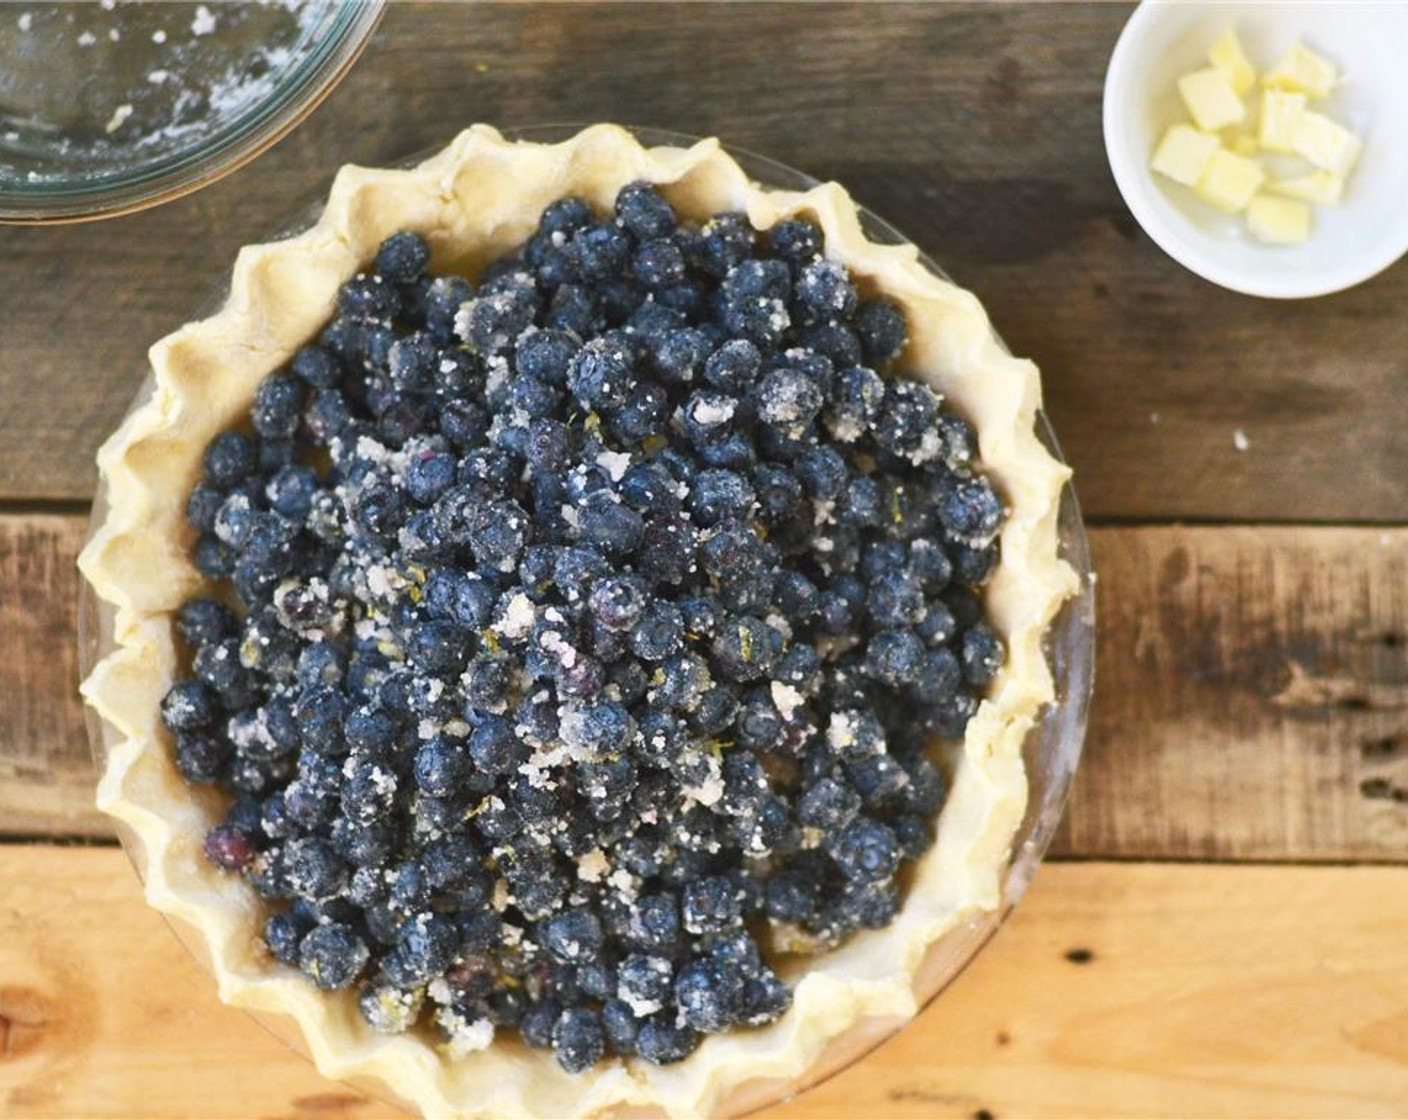 step 12 Remove pie crust from freezer and pour blueberry filling into pie crust. Dot filling with pieces of Unsalted Butter (1 Tbsp).